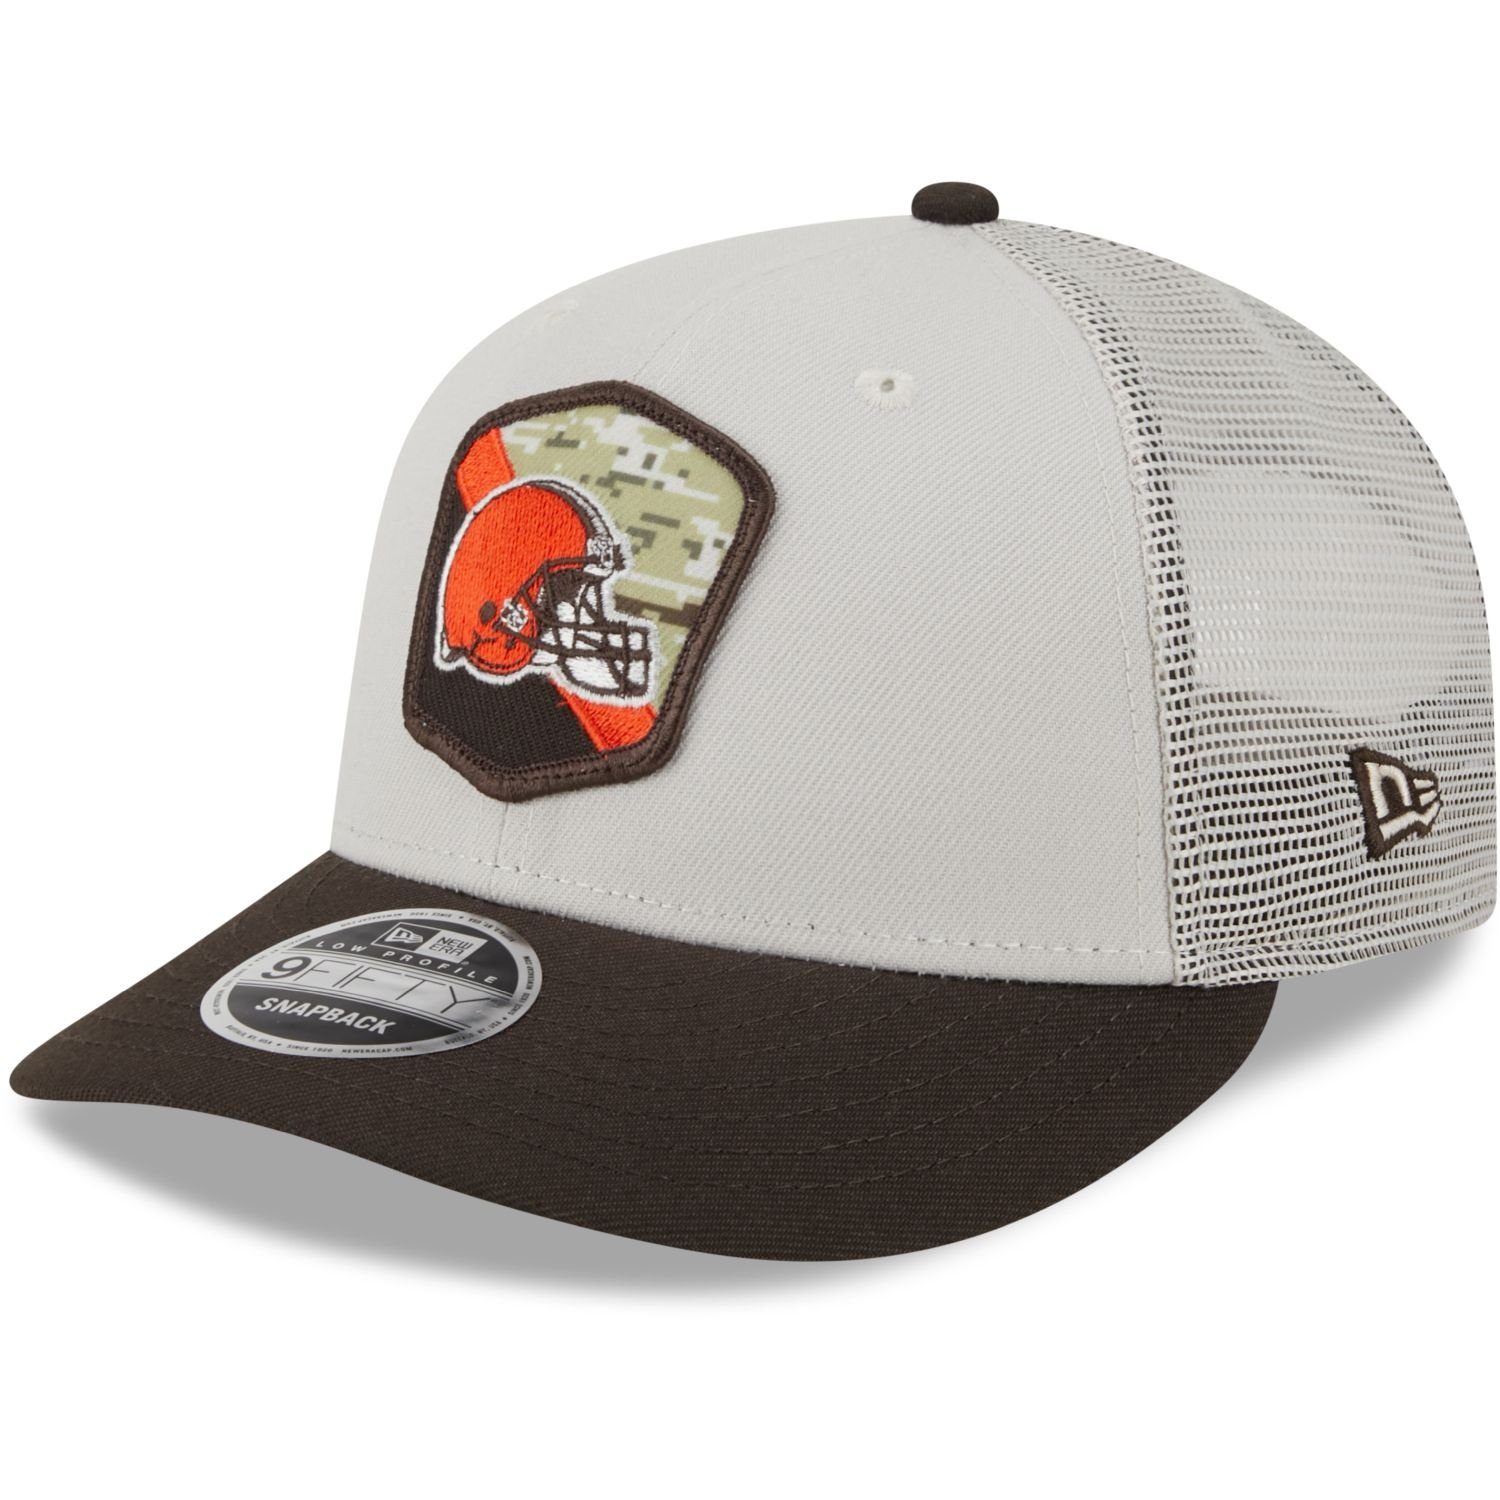 Snap Cleveland 9Fifty Browns Service Era Low Snapback Profile Cap Salute to NFL New